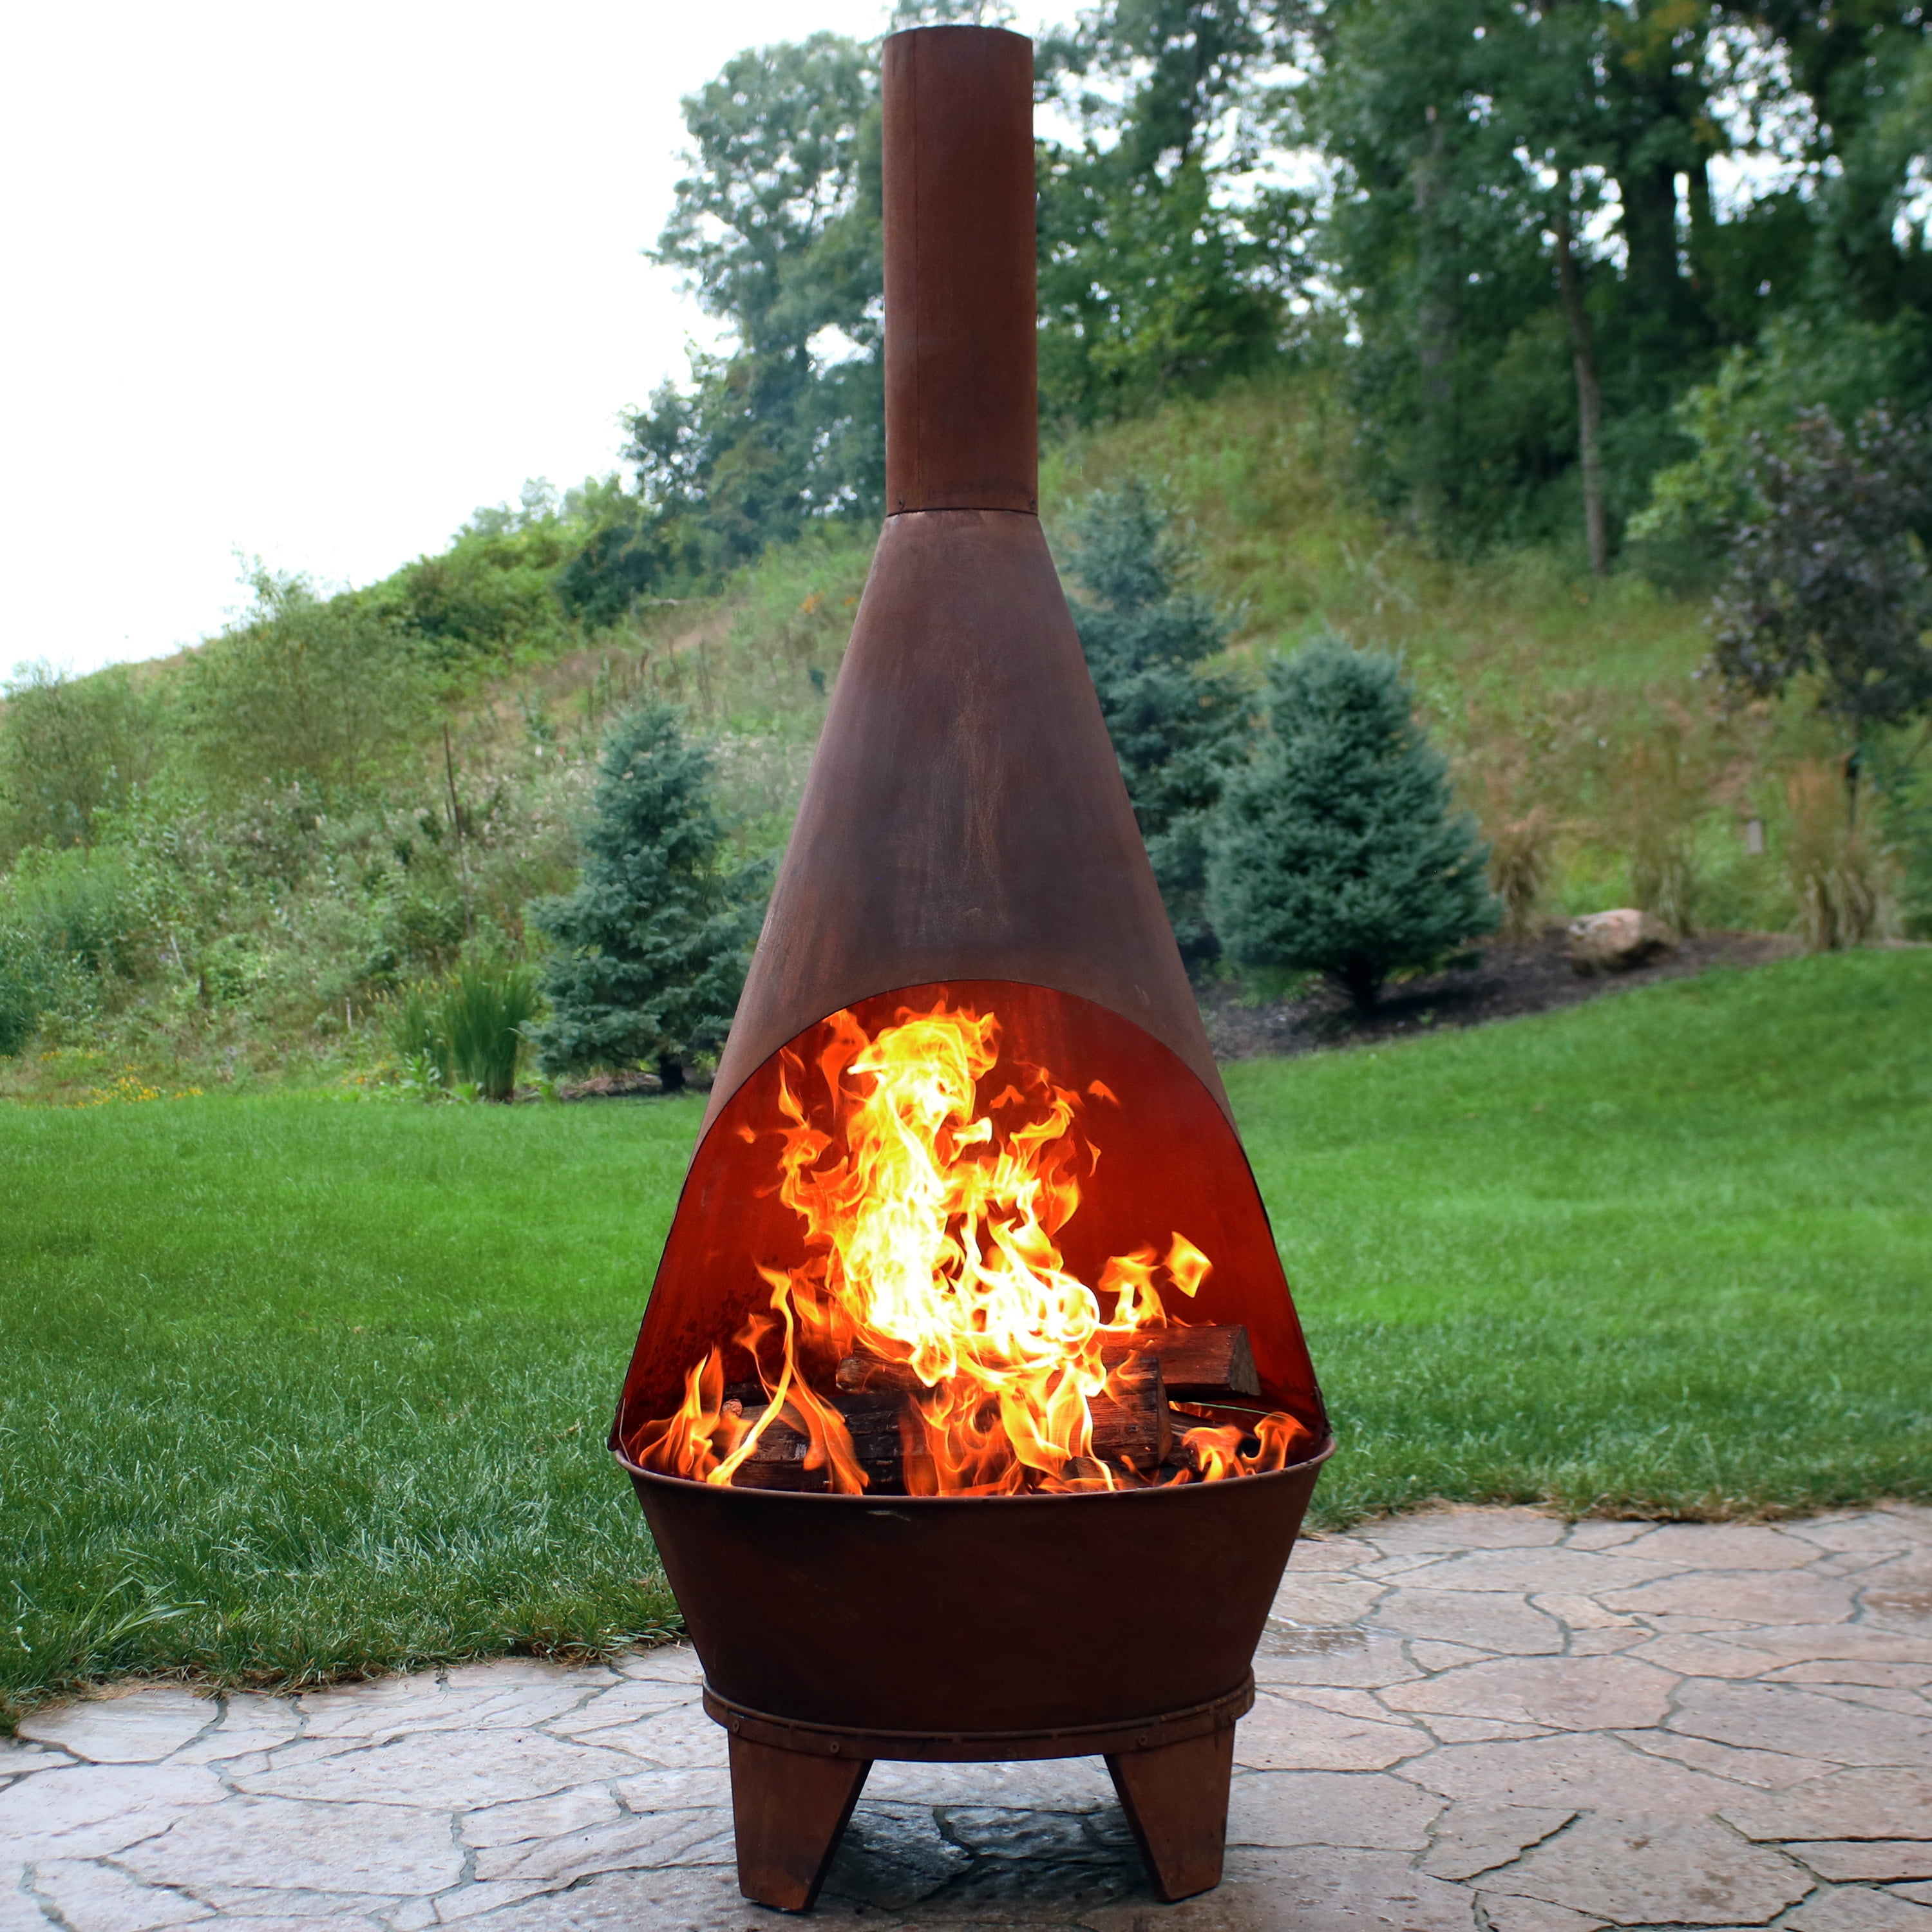 Large Fire Place Grill Garden Grill Grill Chimney Garden Fireplace Outdoor Fireplace Black High Pyramid